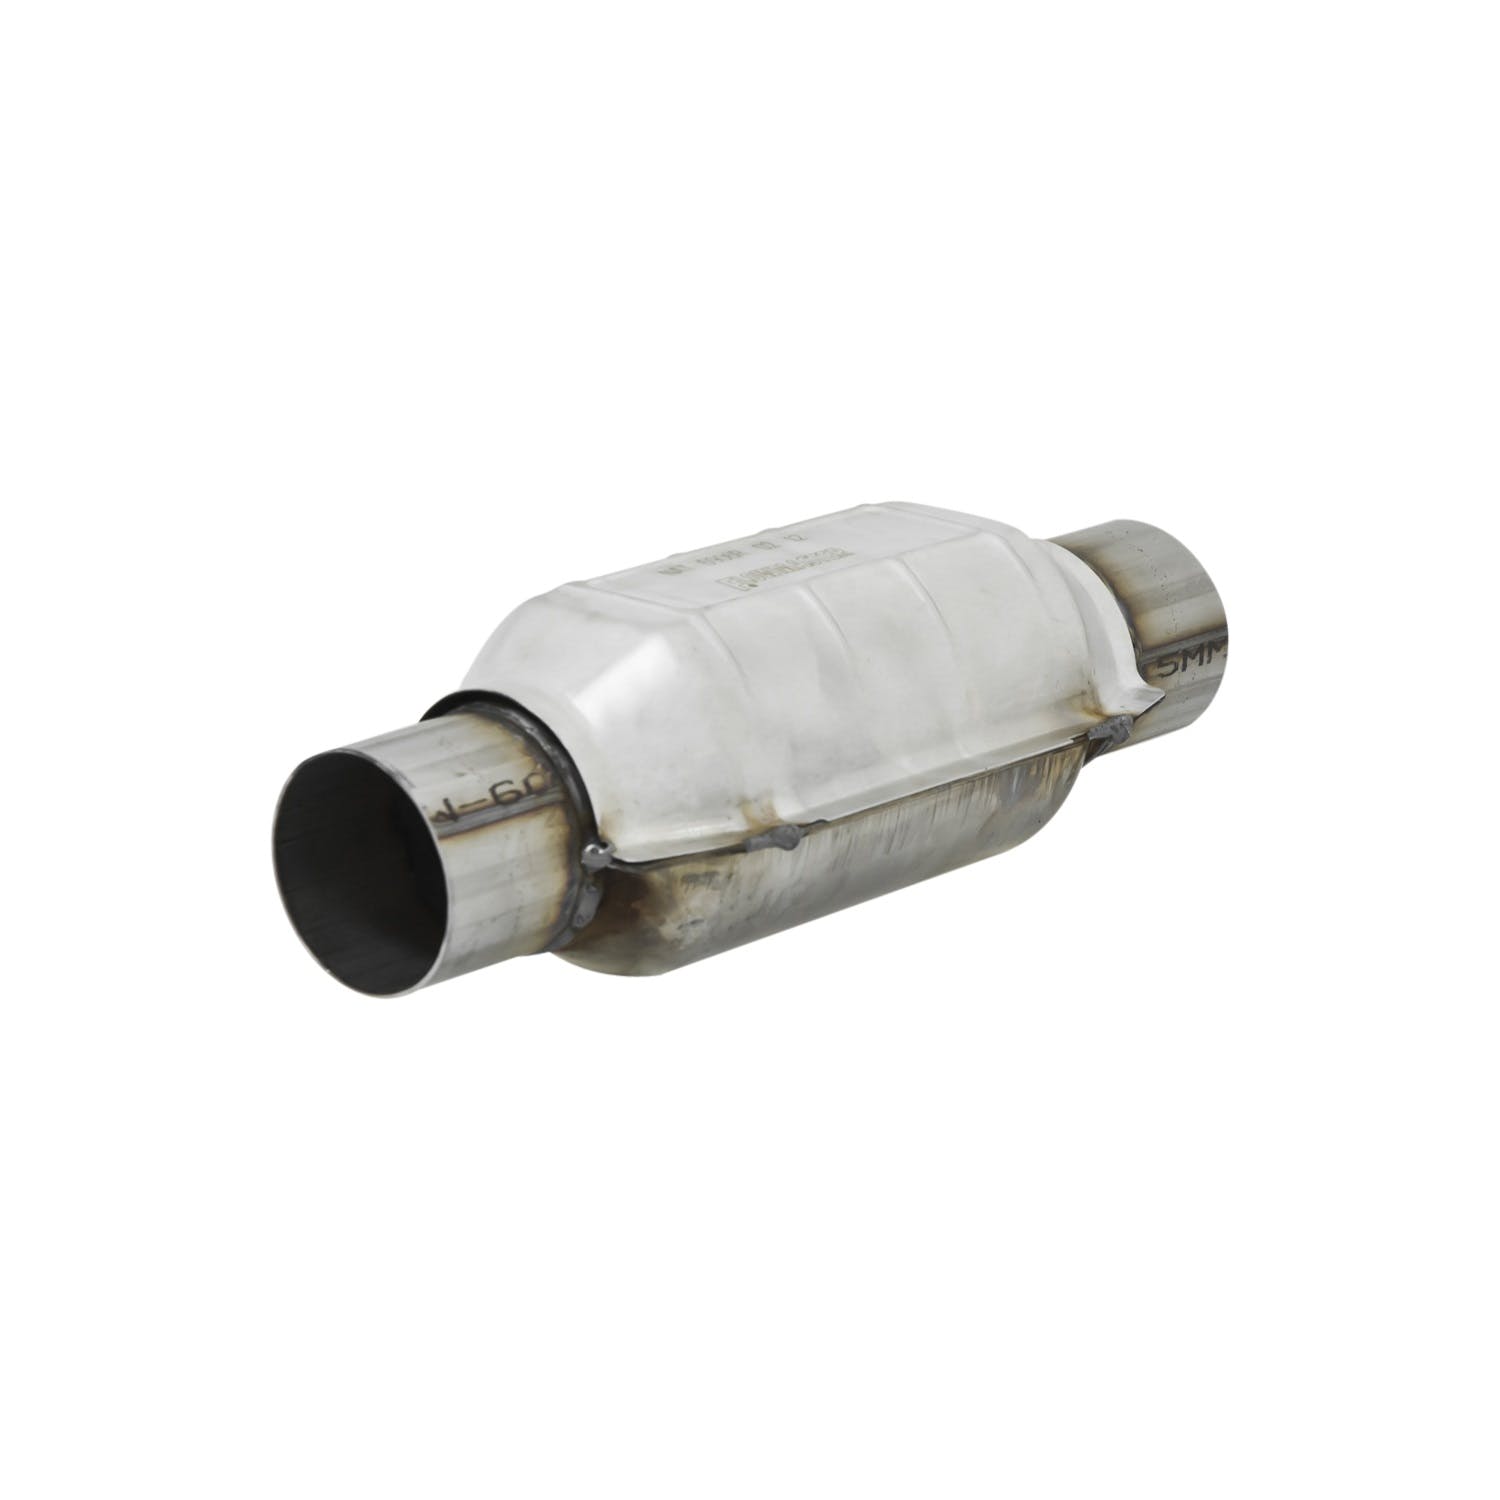 Flowmaster Catalytic Converters 2220120 Catalytic Converter-Universal-222 Series-2.00 in. Inlet/Outlet-49 State